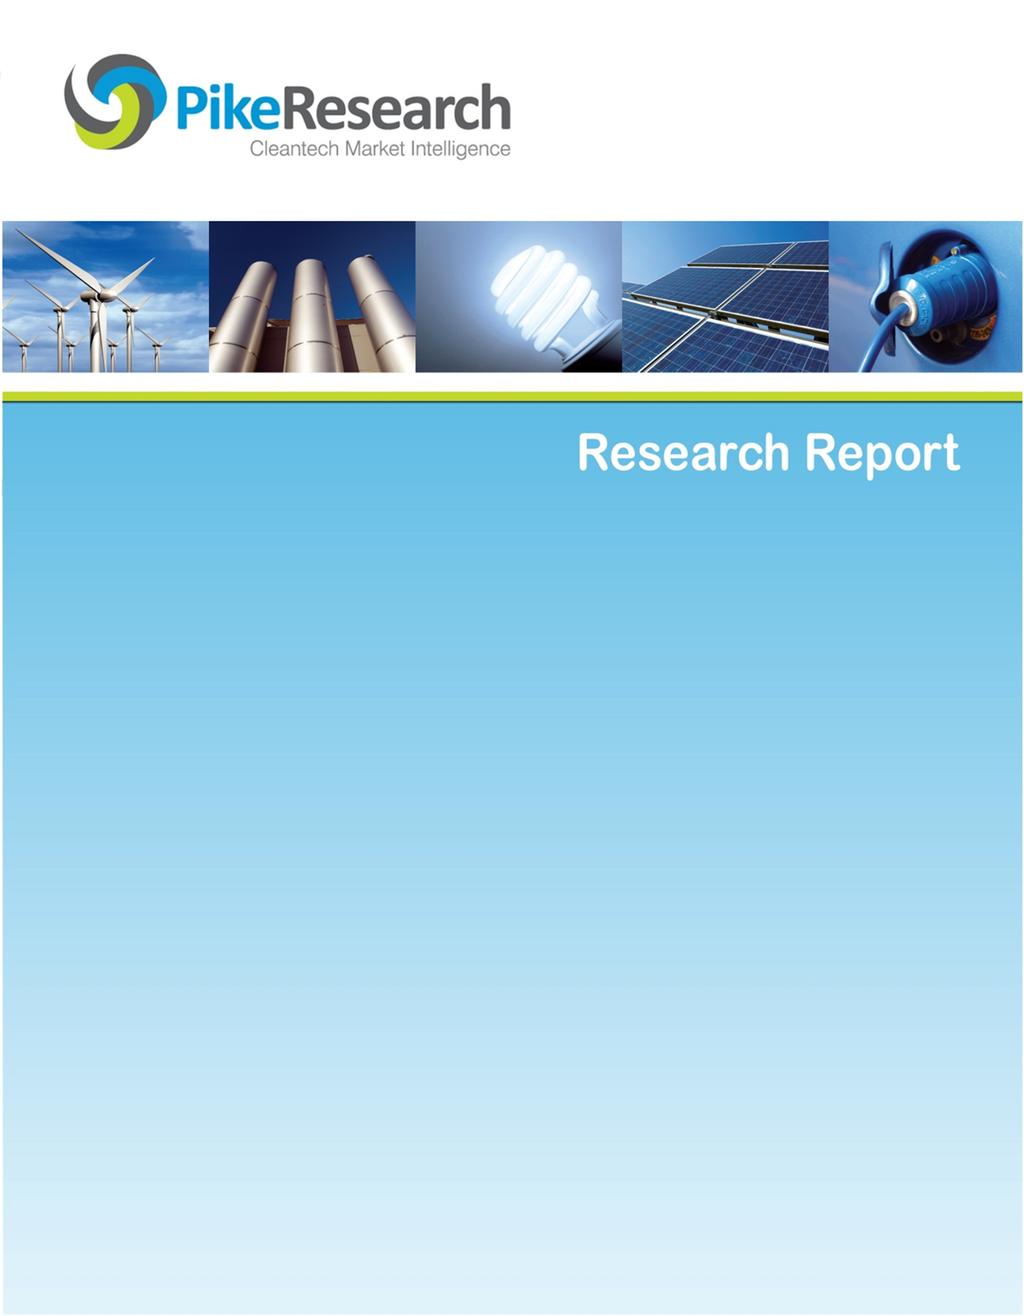 EXECUTIVE SUMMARY: Electric Vehicle Charging Residential, Commercial, DC Fast Charge, and Wireless Electric Vehicle Supply Equipment: Market Analysis and Forecasts NOTE: This document is a free